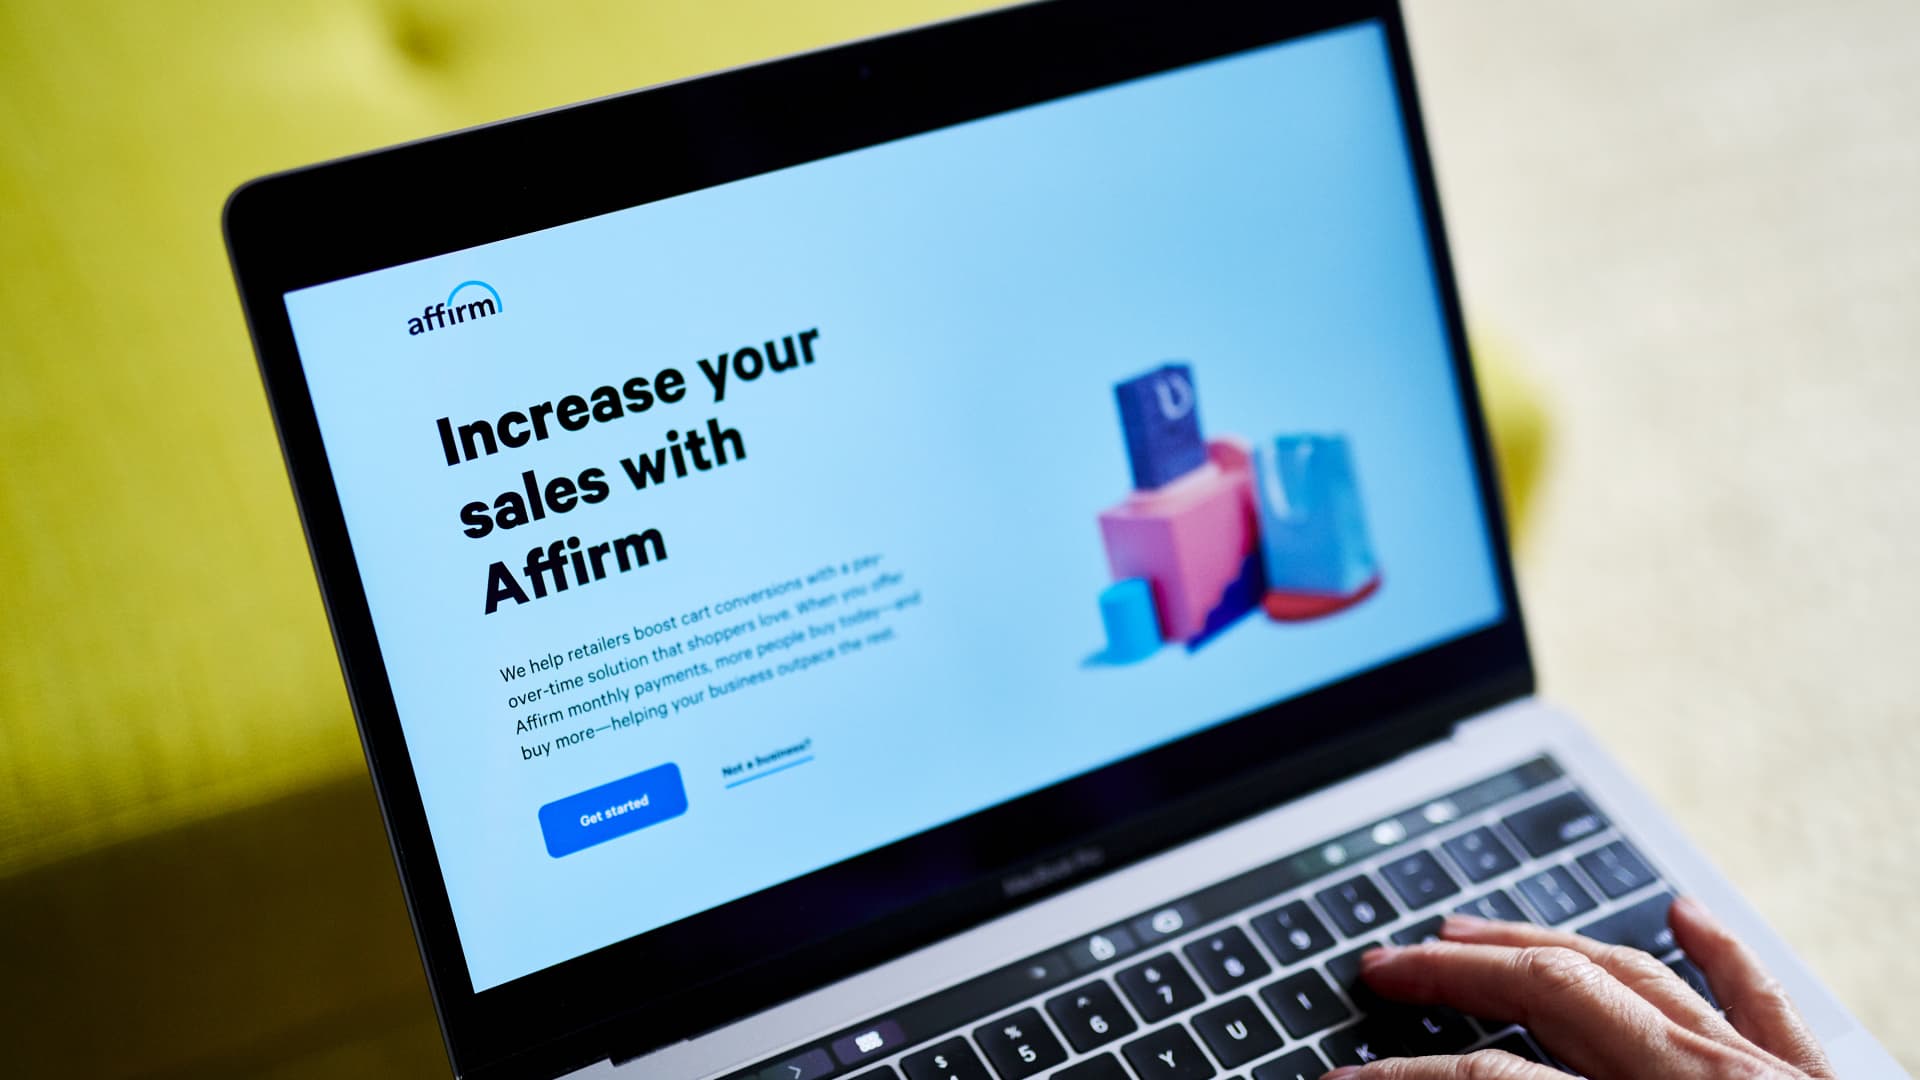 Affirm shares rocket 26% after better-than-expected results and strong guidance